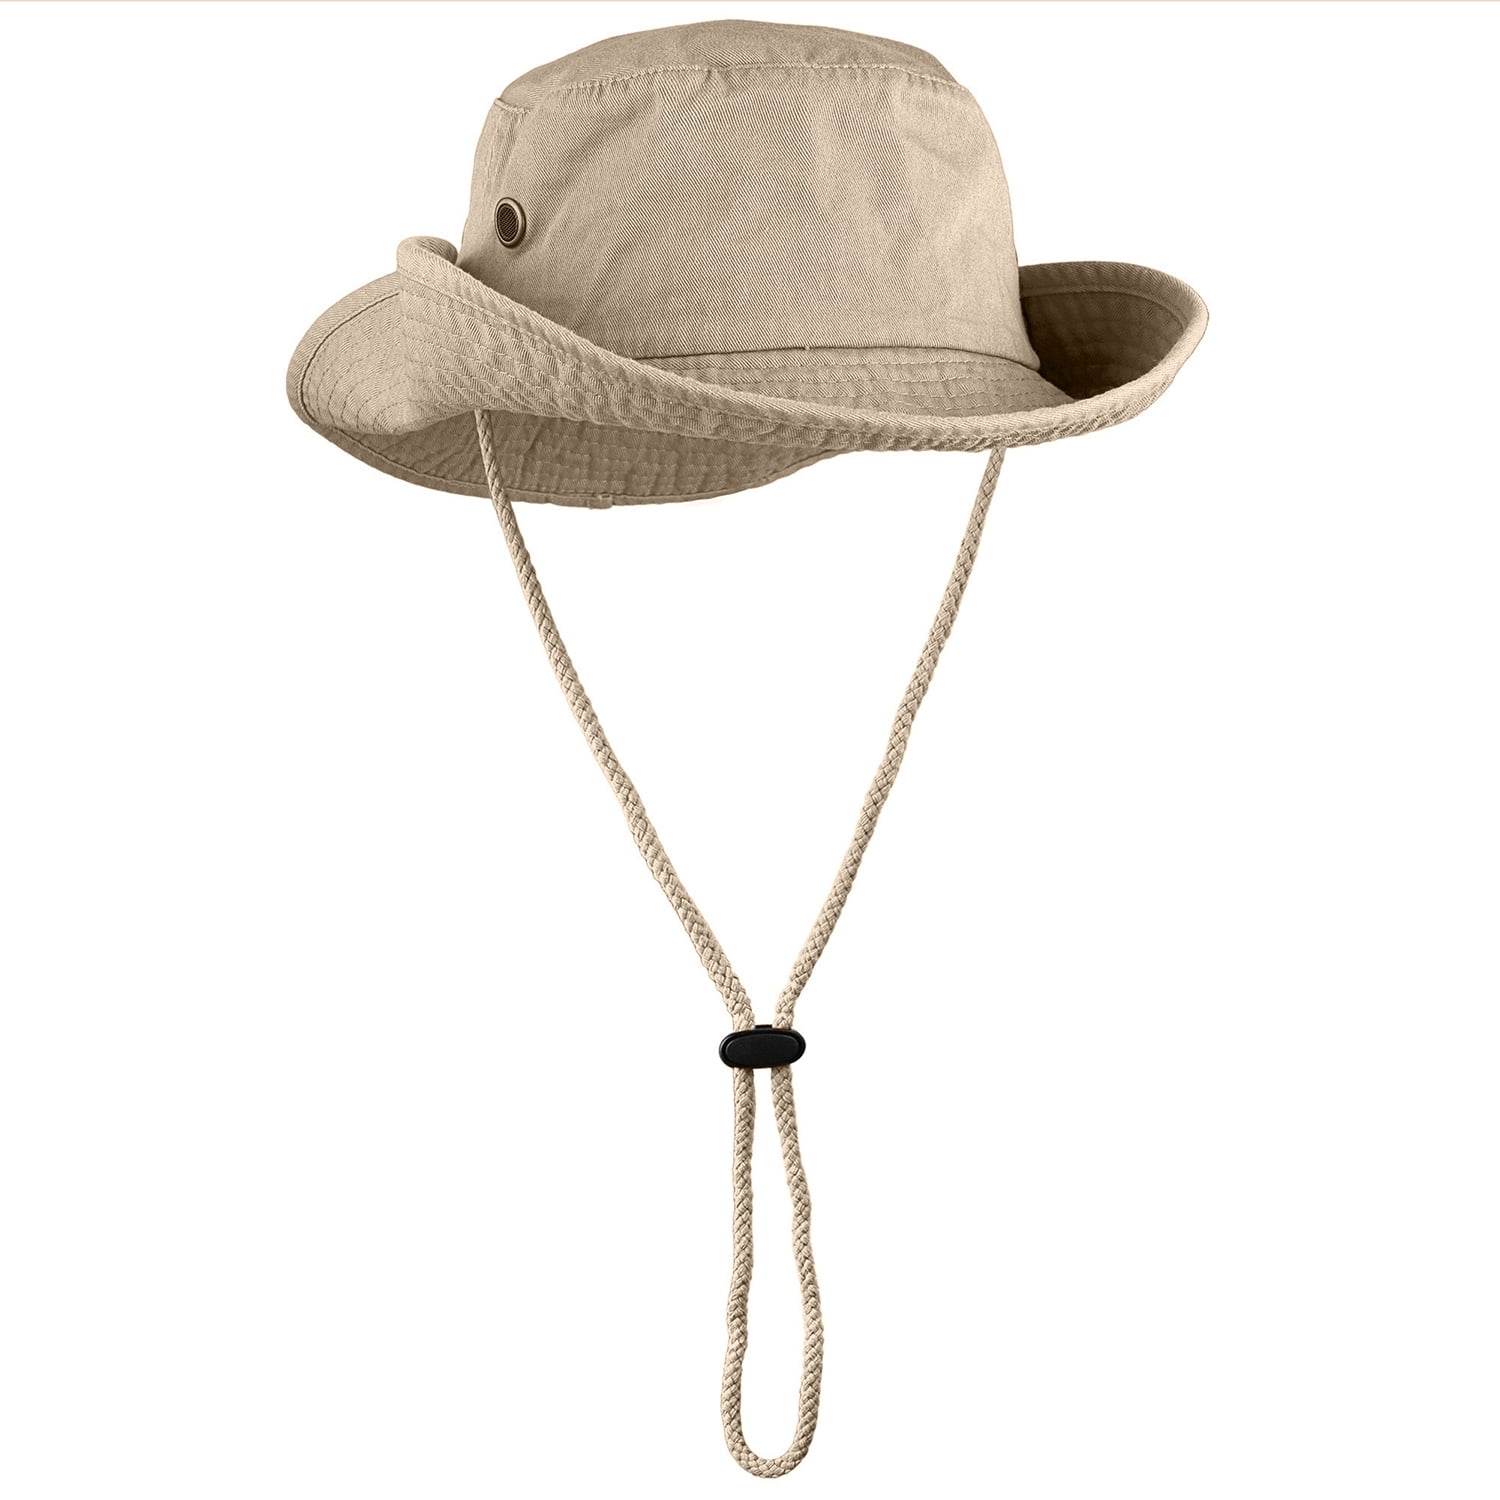 Clakllie Jungle Boonie Sun Hat Quick Drying Outdoor Fishing Cap